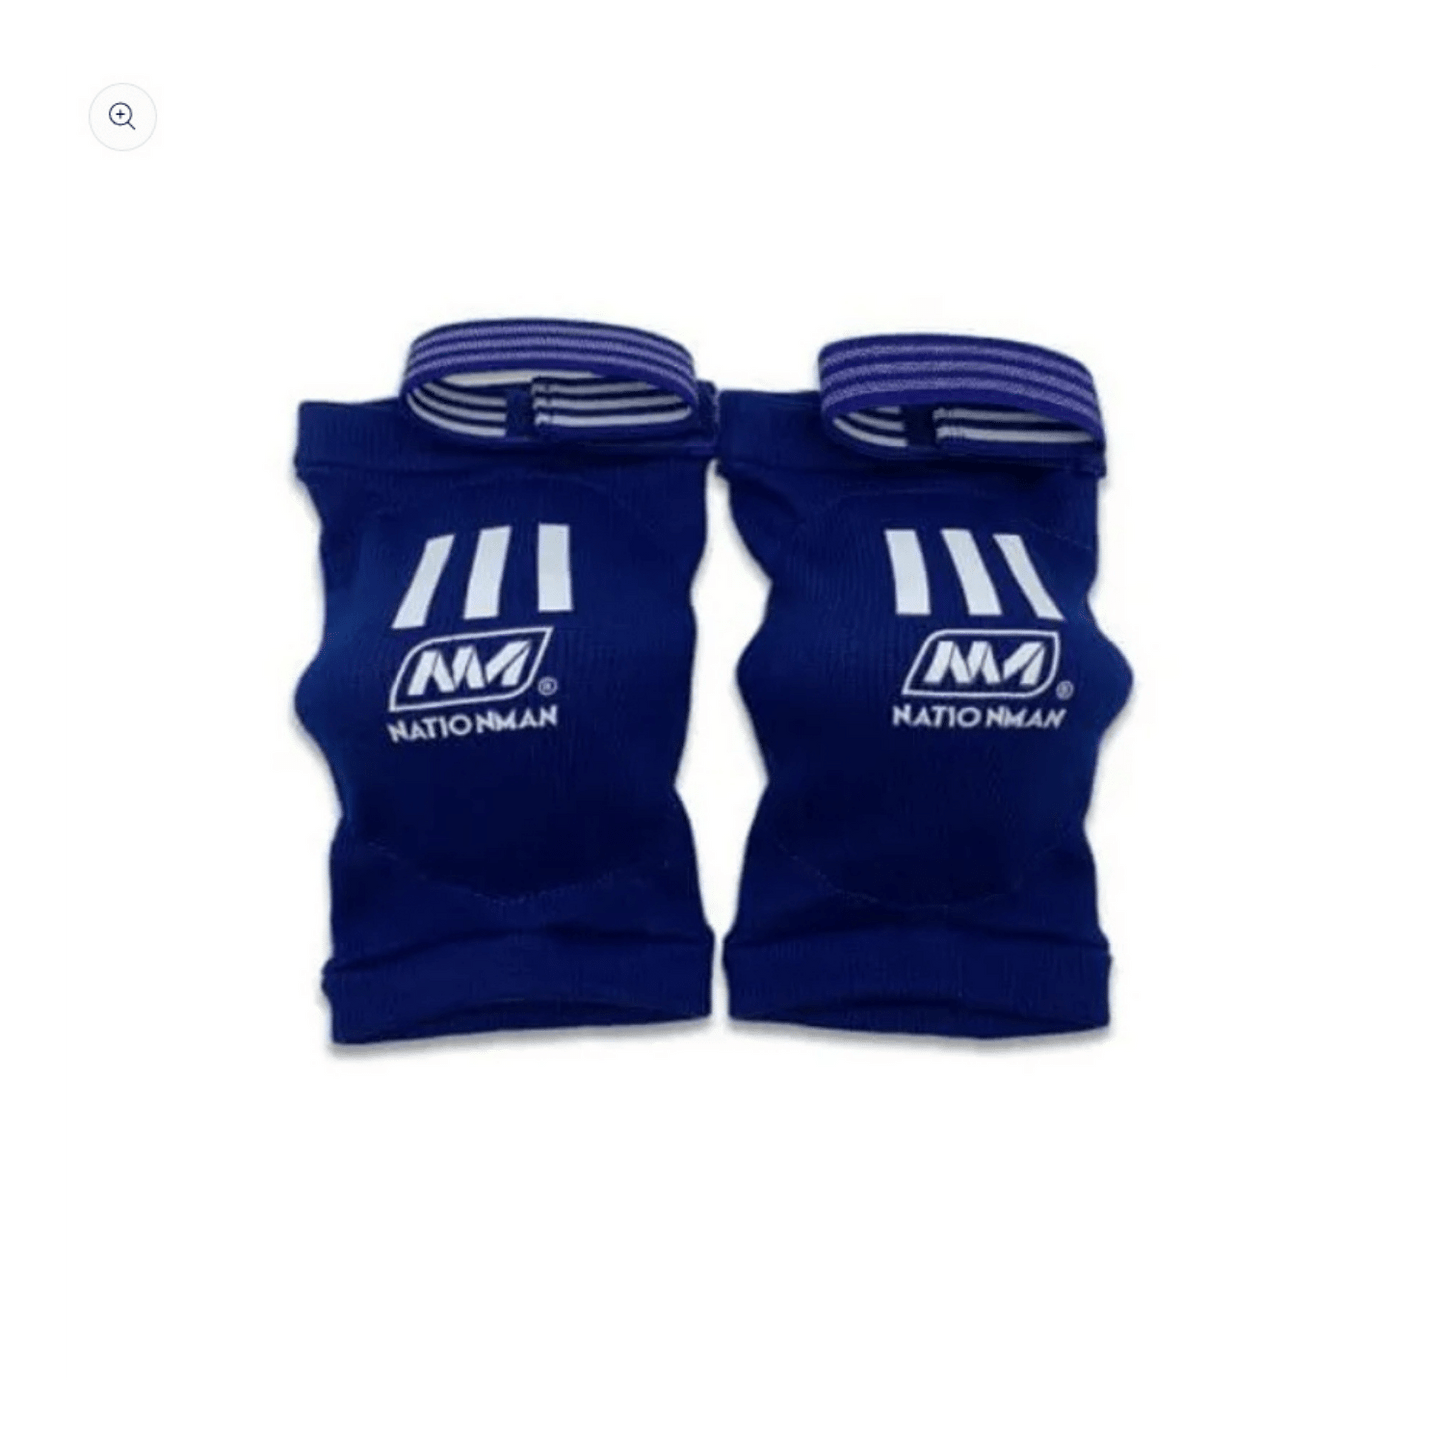 A pair of Nationman blue elbow pads with white stripes for Muay Thai training.